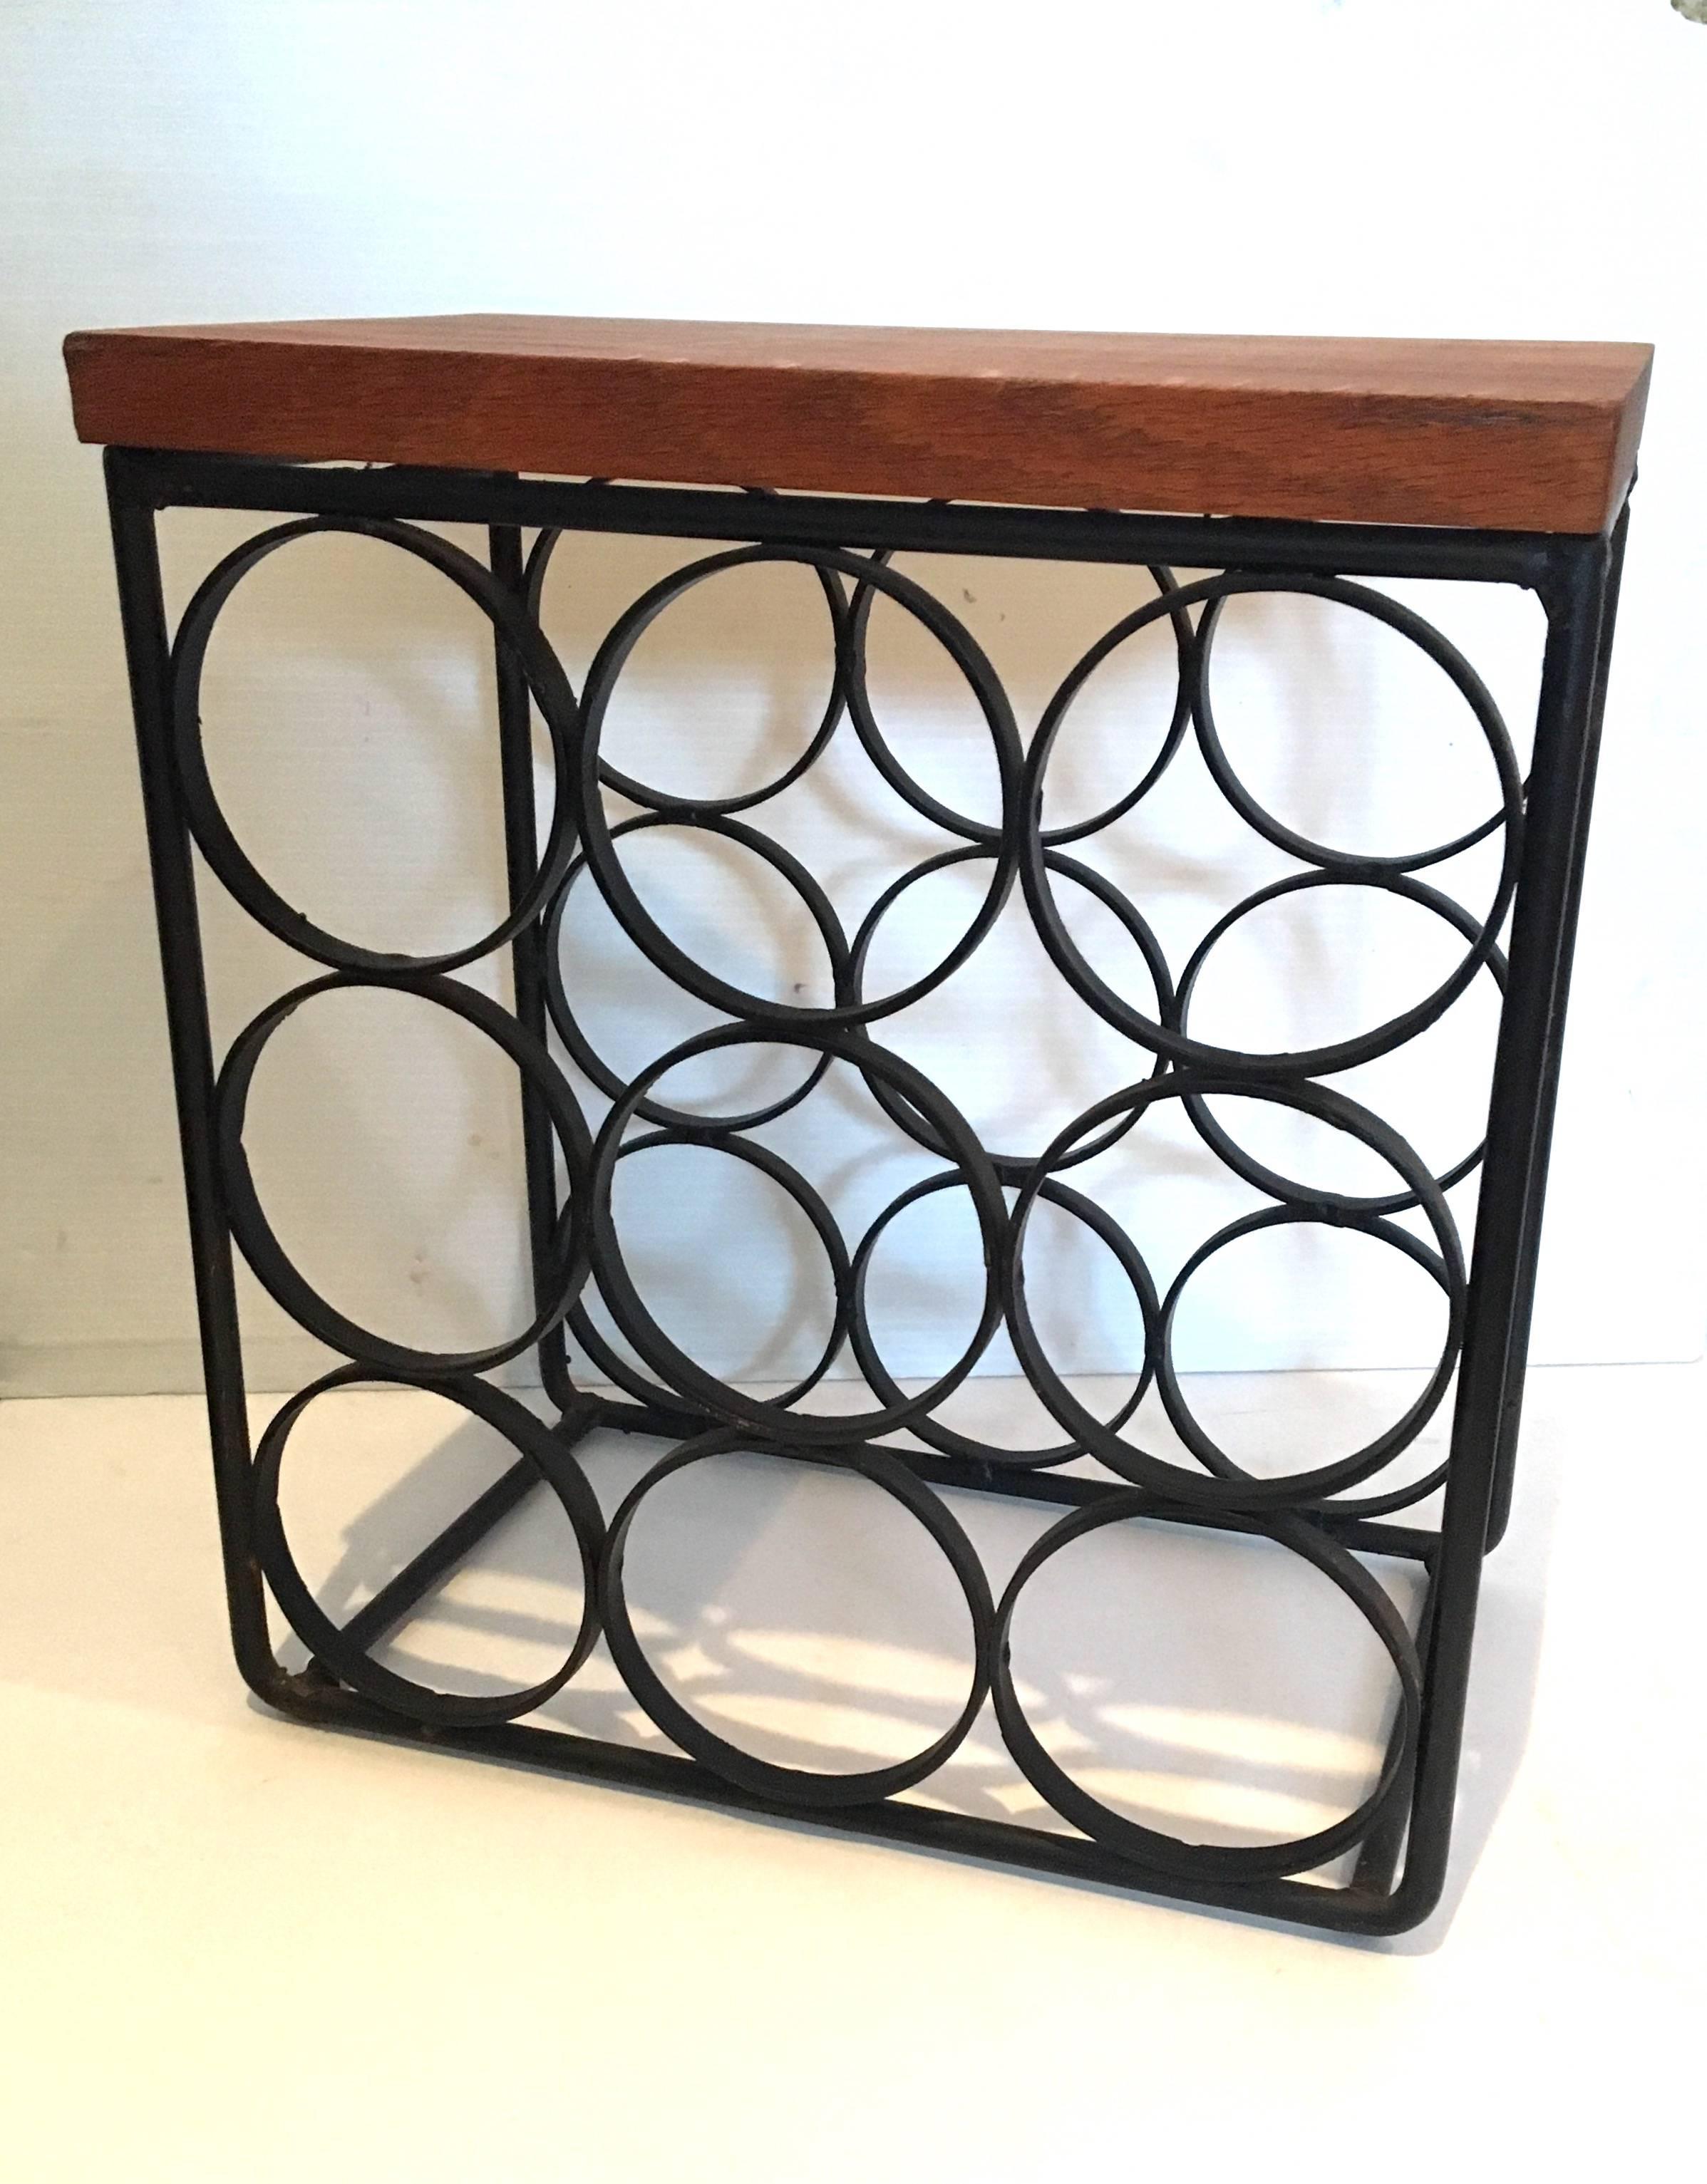 Solid iron nine bottle capacity wine rack. With solid wood cutting board, circa 1950s. Designed by Arthur Umanoff California design.